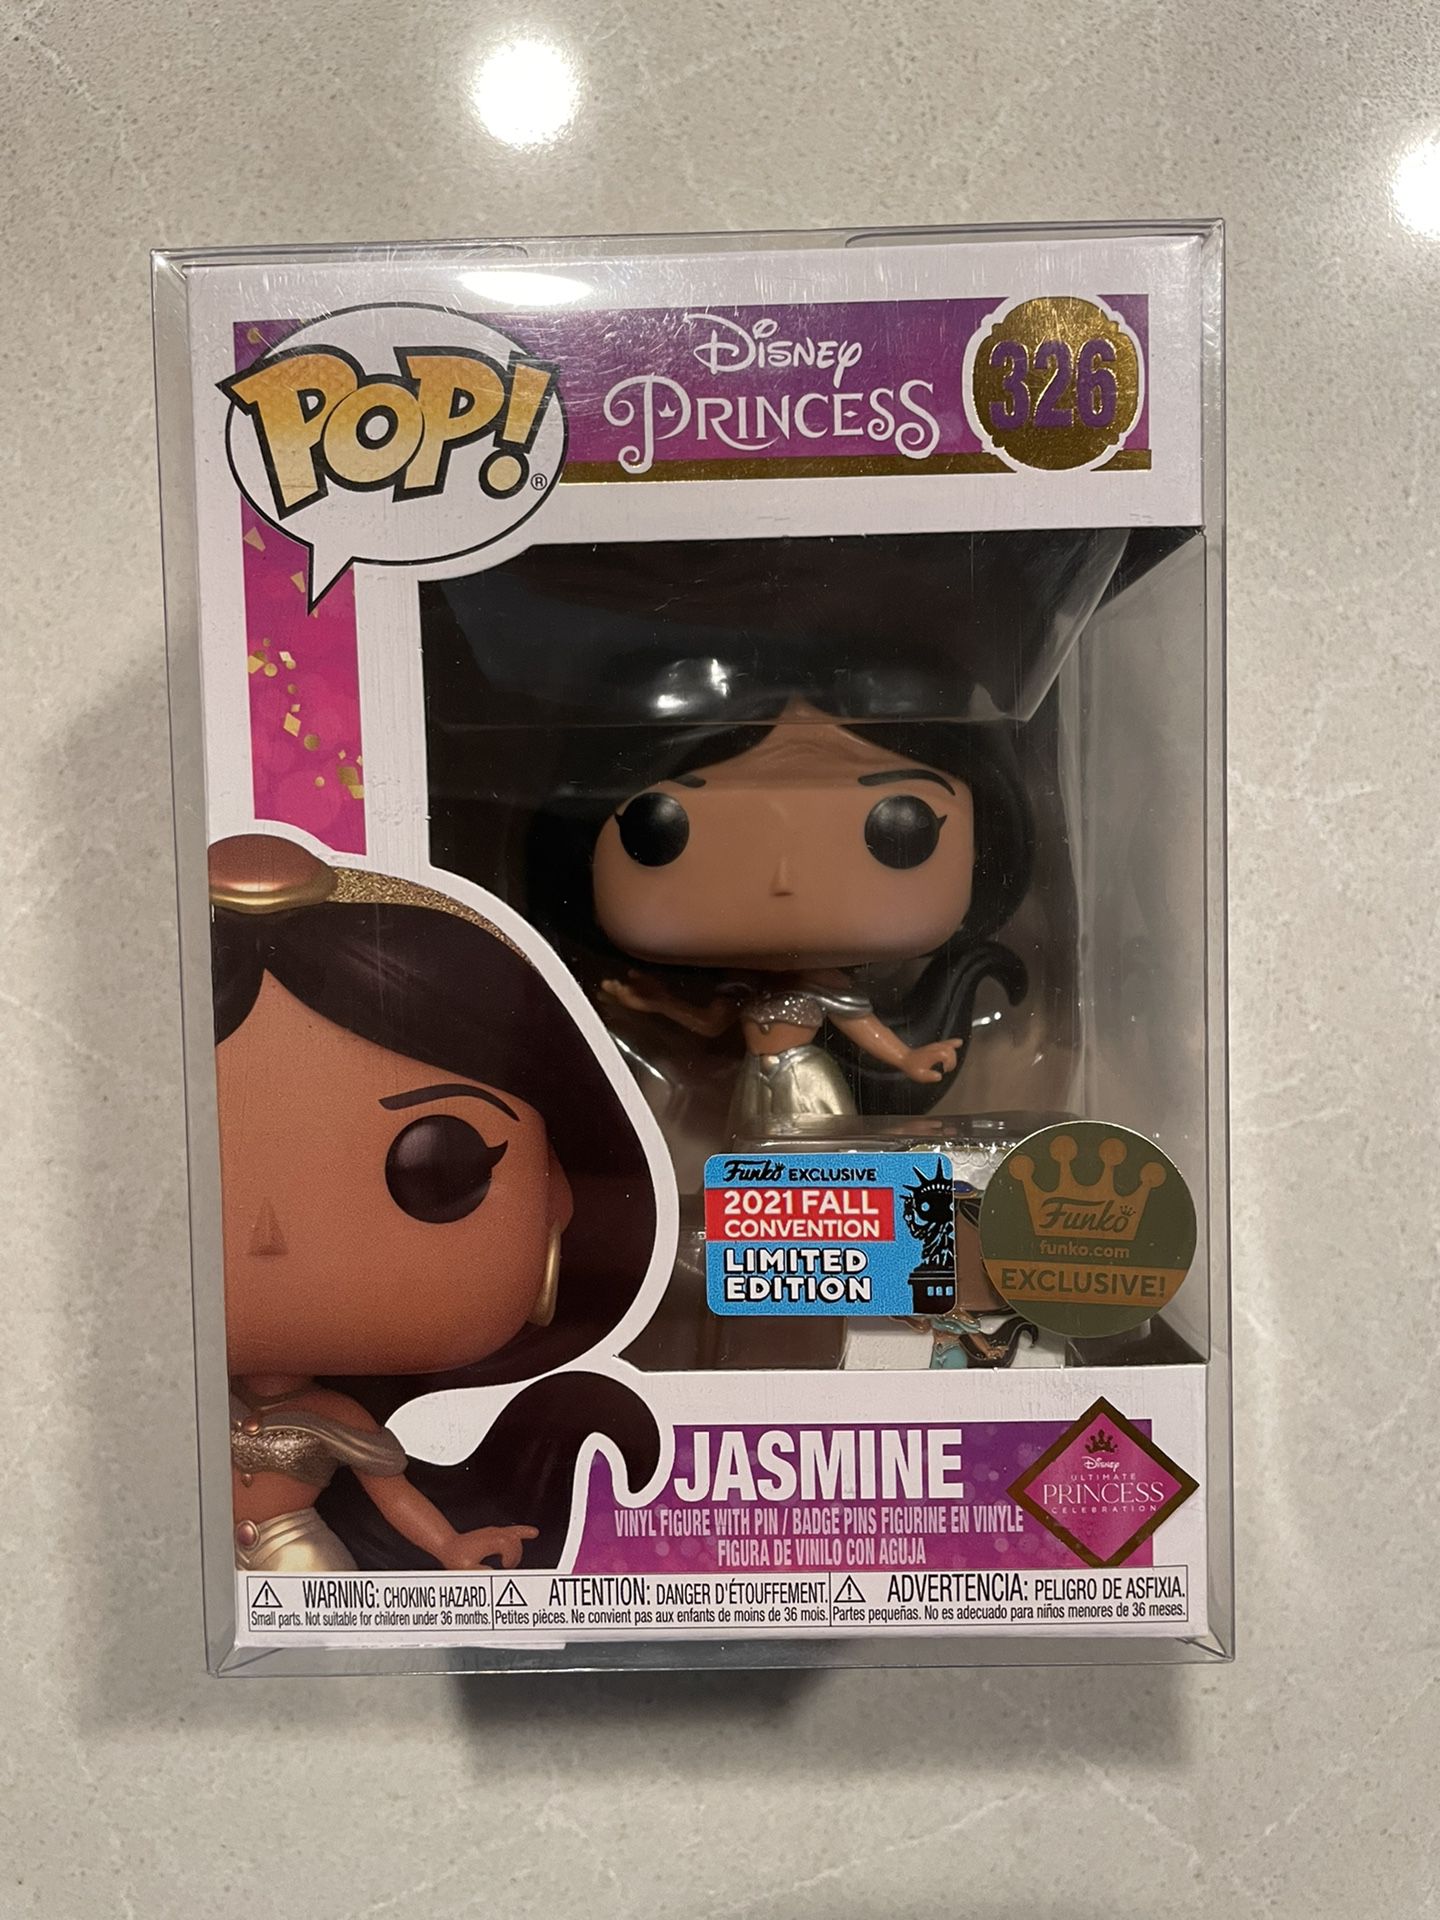 Jasmine Ultimate Princess Collection Funko Pop *MINT* 2021 NYCC Fall Convention Exclusive + Pin Aladdin Disney 326 with protector Festival Fun ECCC